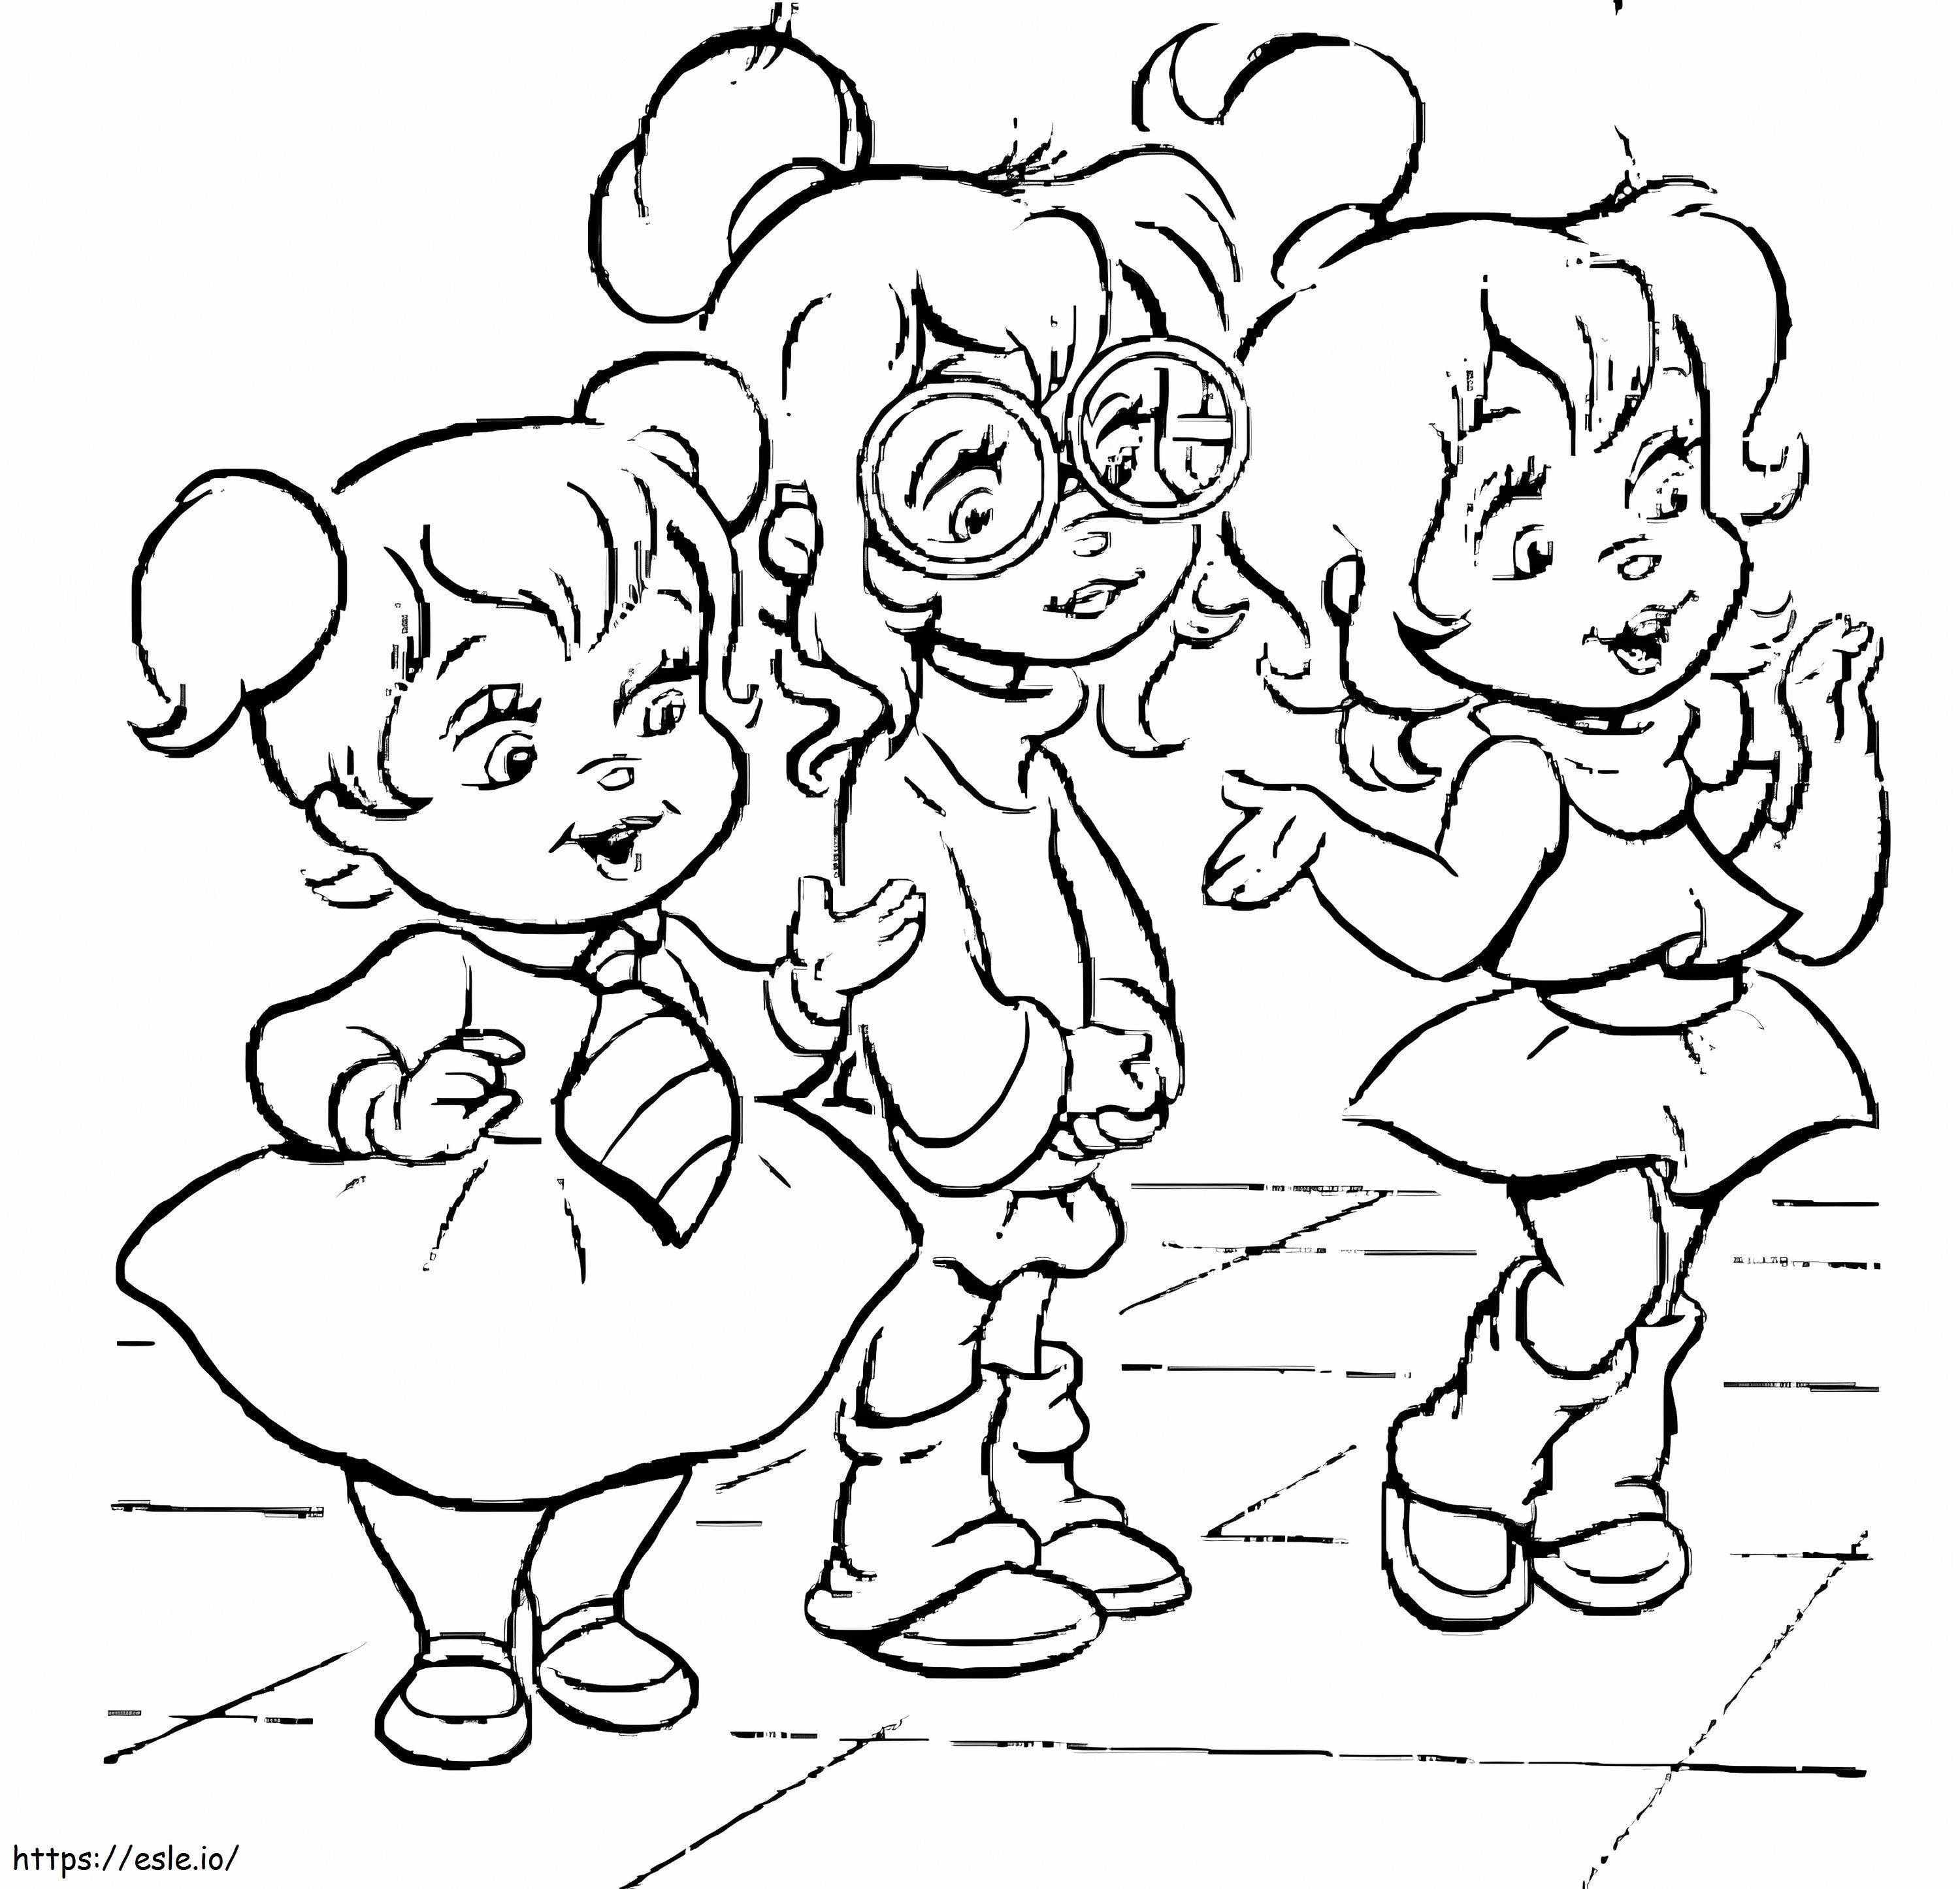 Happy Chipettes coloring page